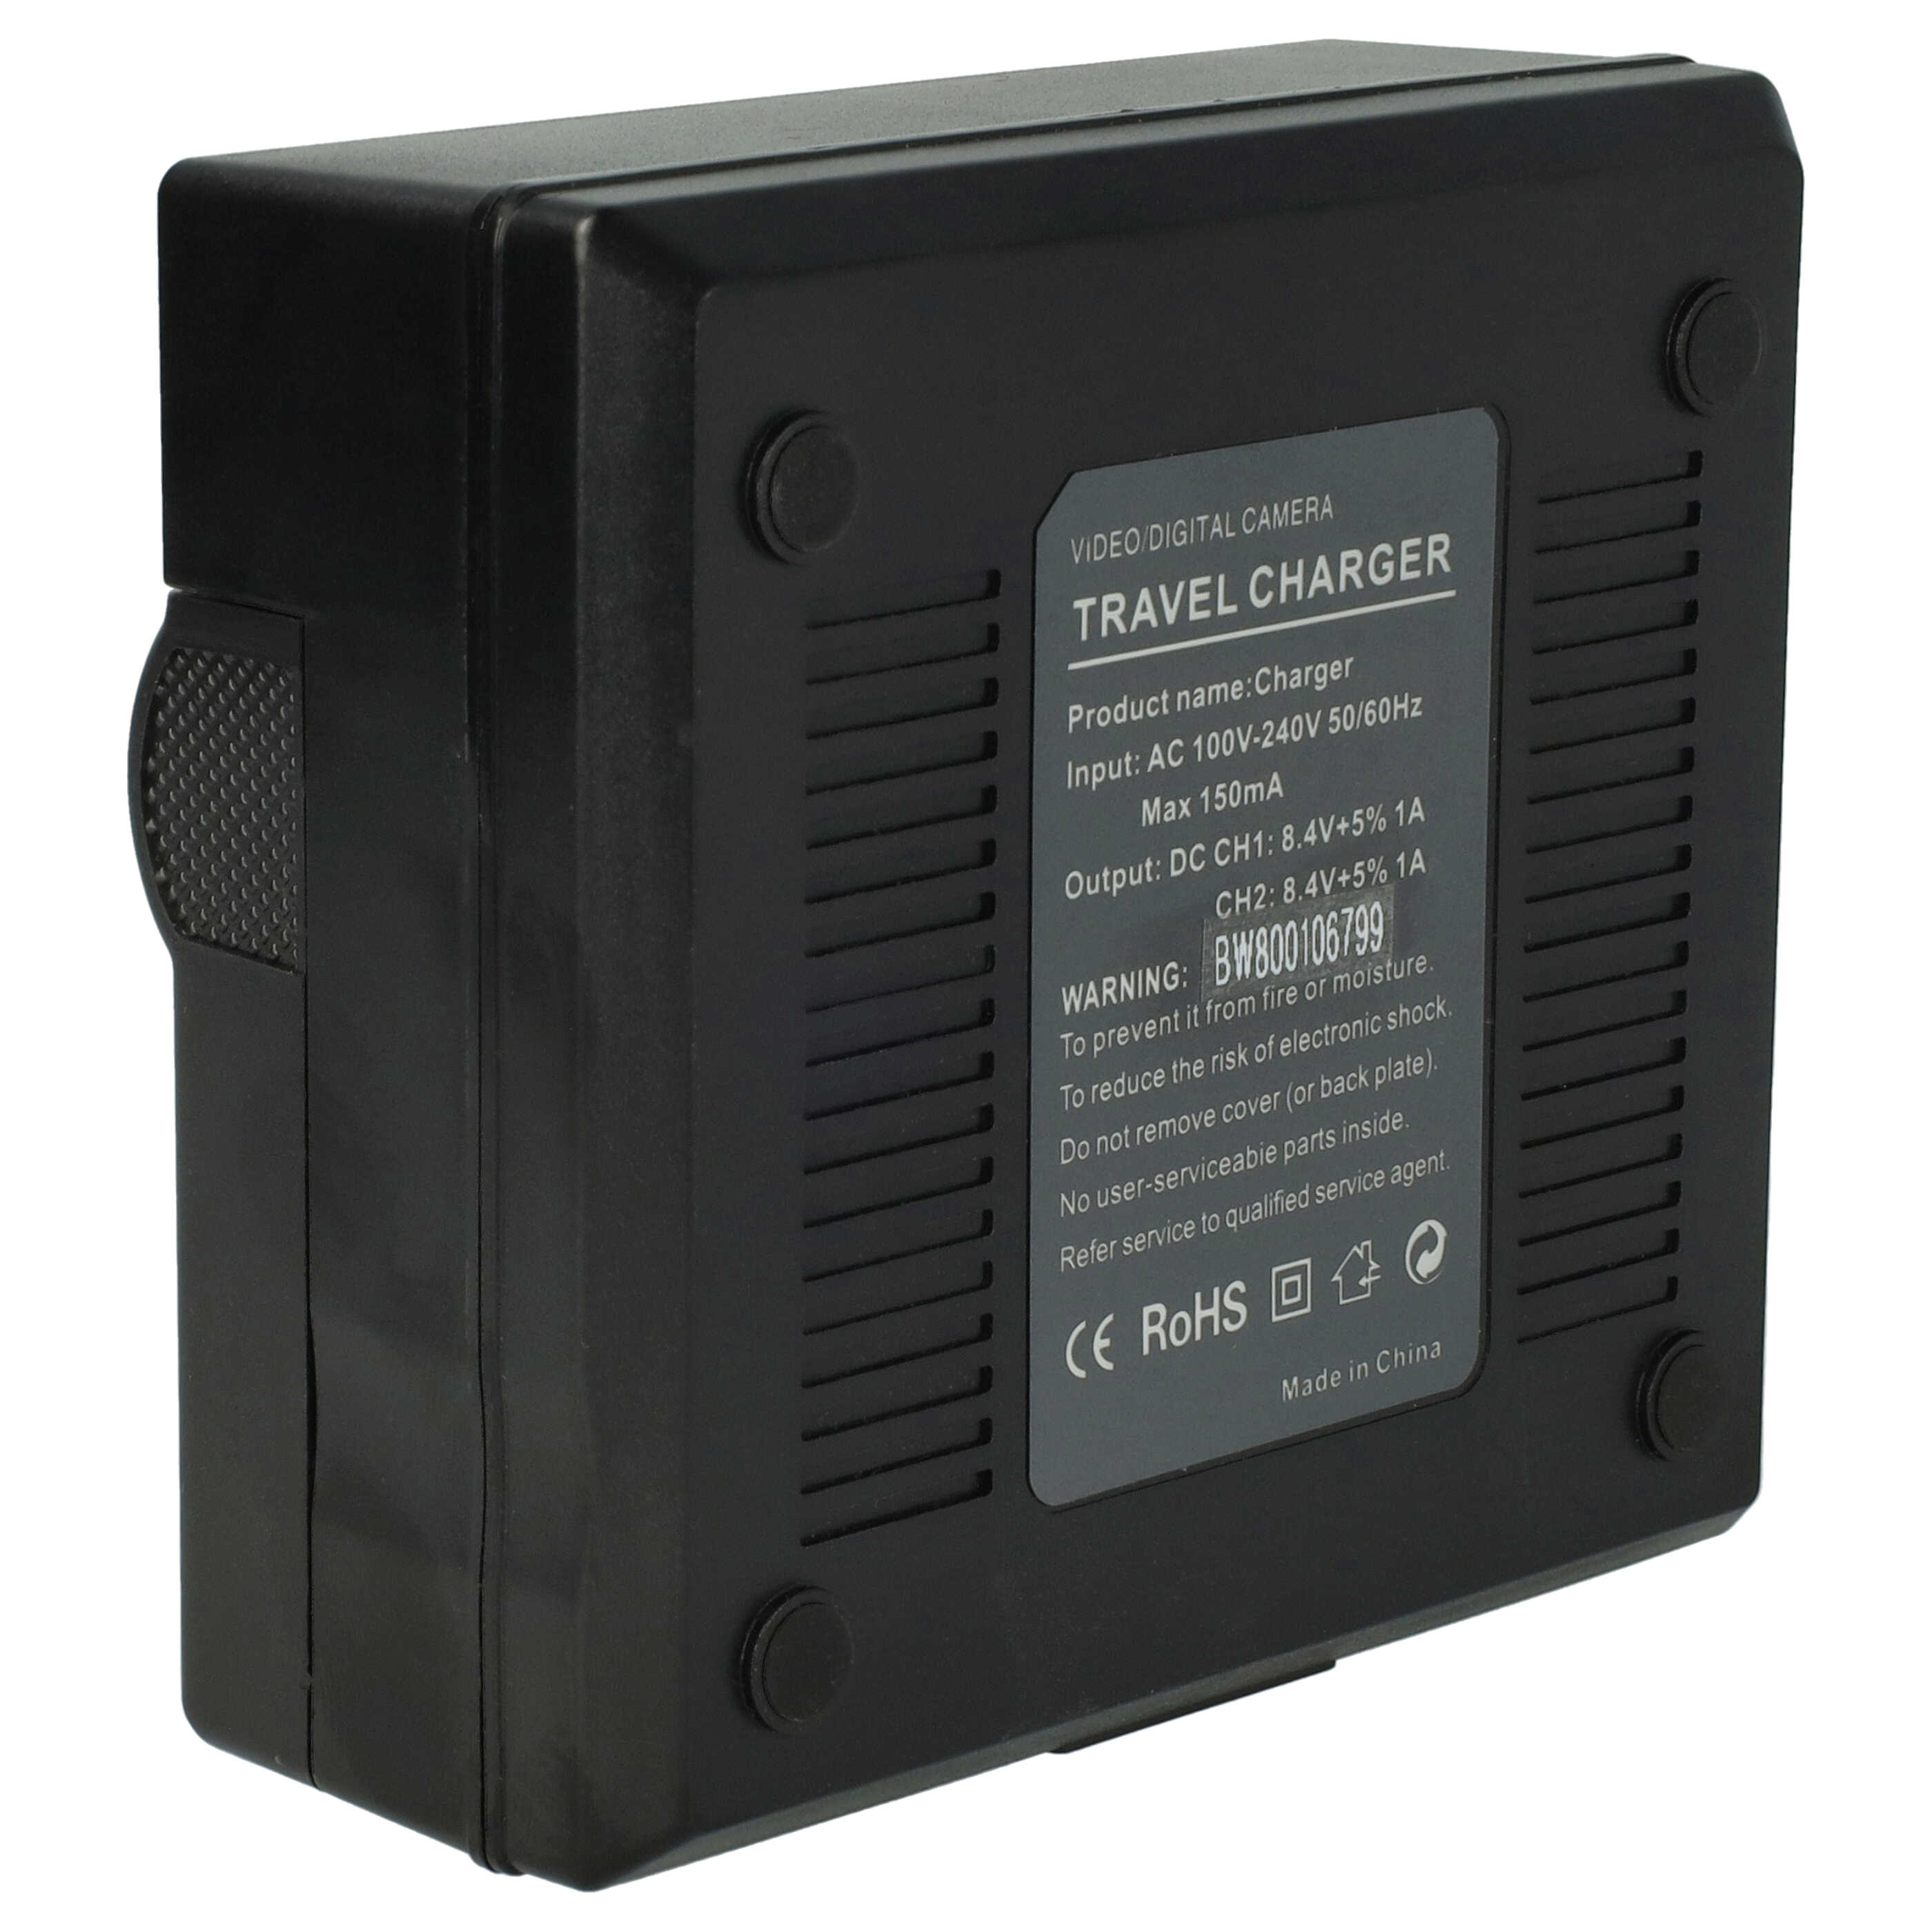 Battery Charger suitable for Sony NP-FW50 Camera etc. - 0.5 / 0.9 A, 4.2/8.4 V